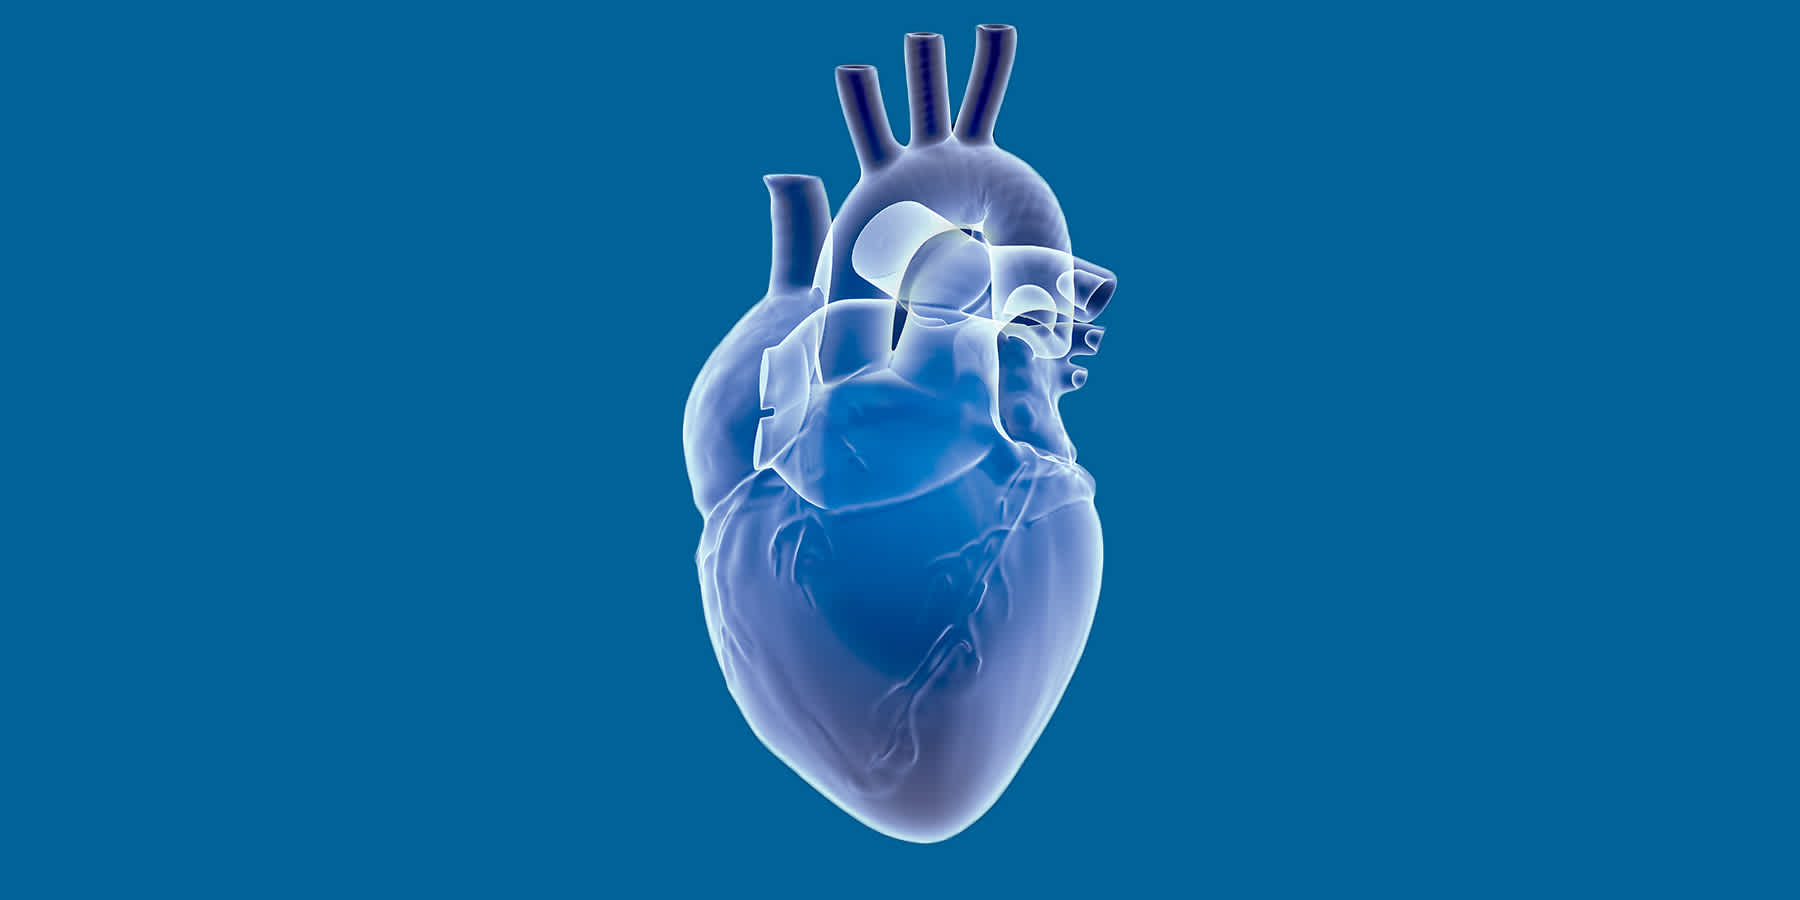 Illustration of anatomical heart against a blue background to represent resting heart rate